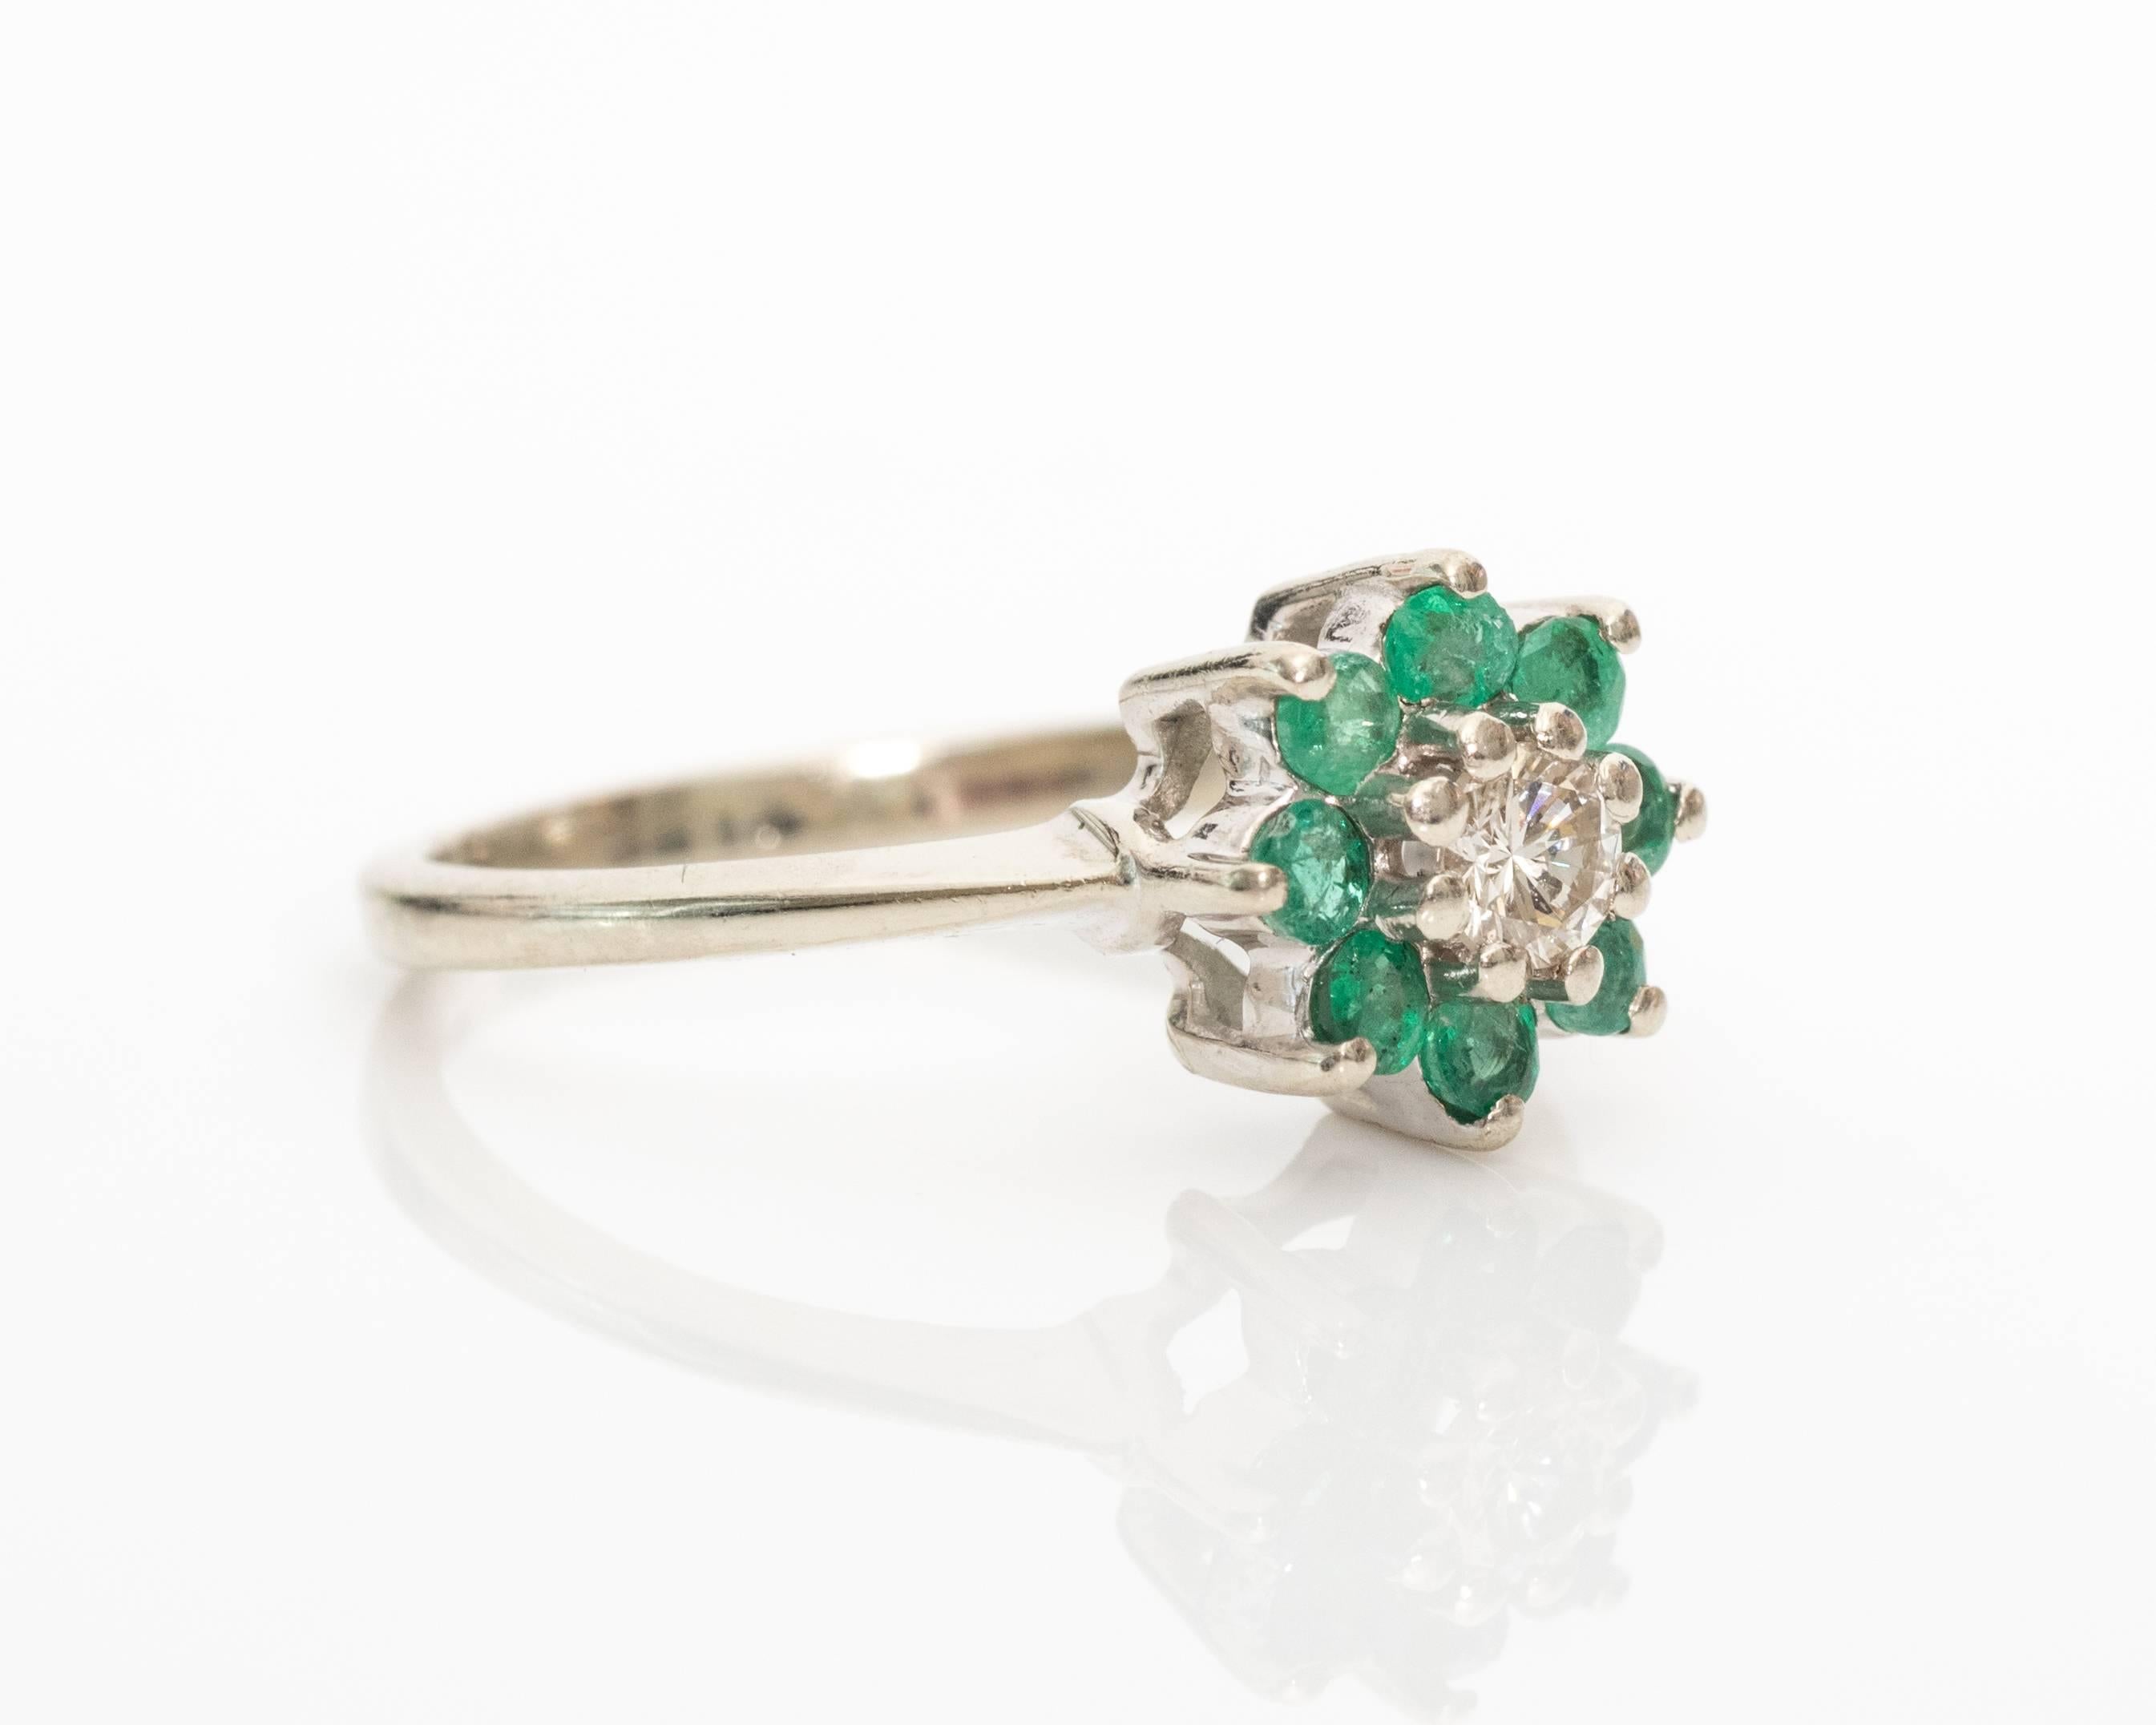 Still in prime condition, this ring shines brightly with vivid green emeralds and a centerpiece diamond. The eight emeralds are held together with eight prongs around the frame. The diamond is slightly elevated above the emeralds with an eight-prong